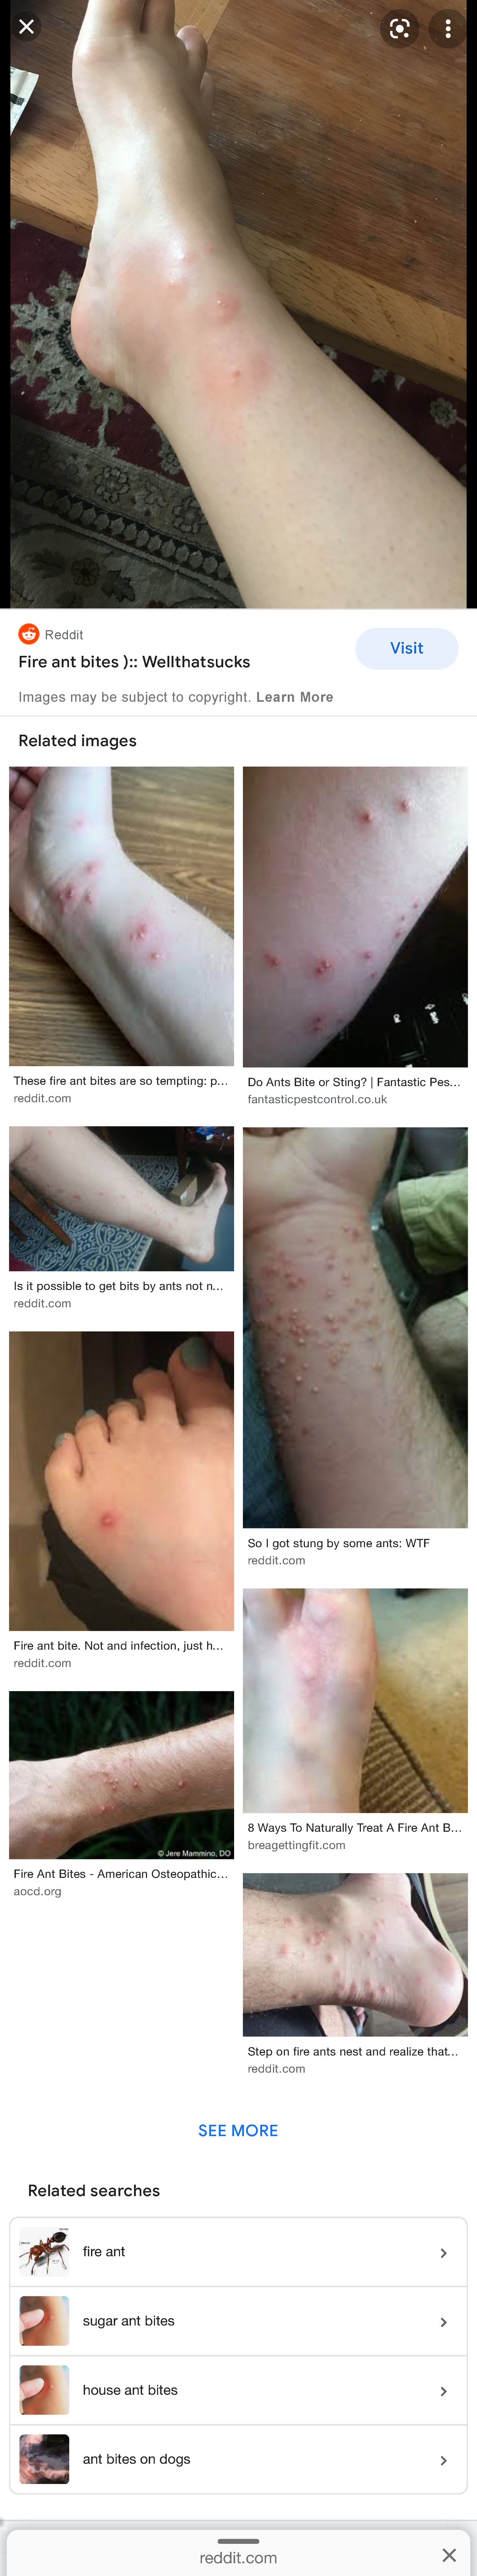 fire ants bites on dogs